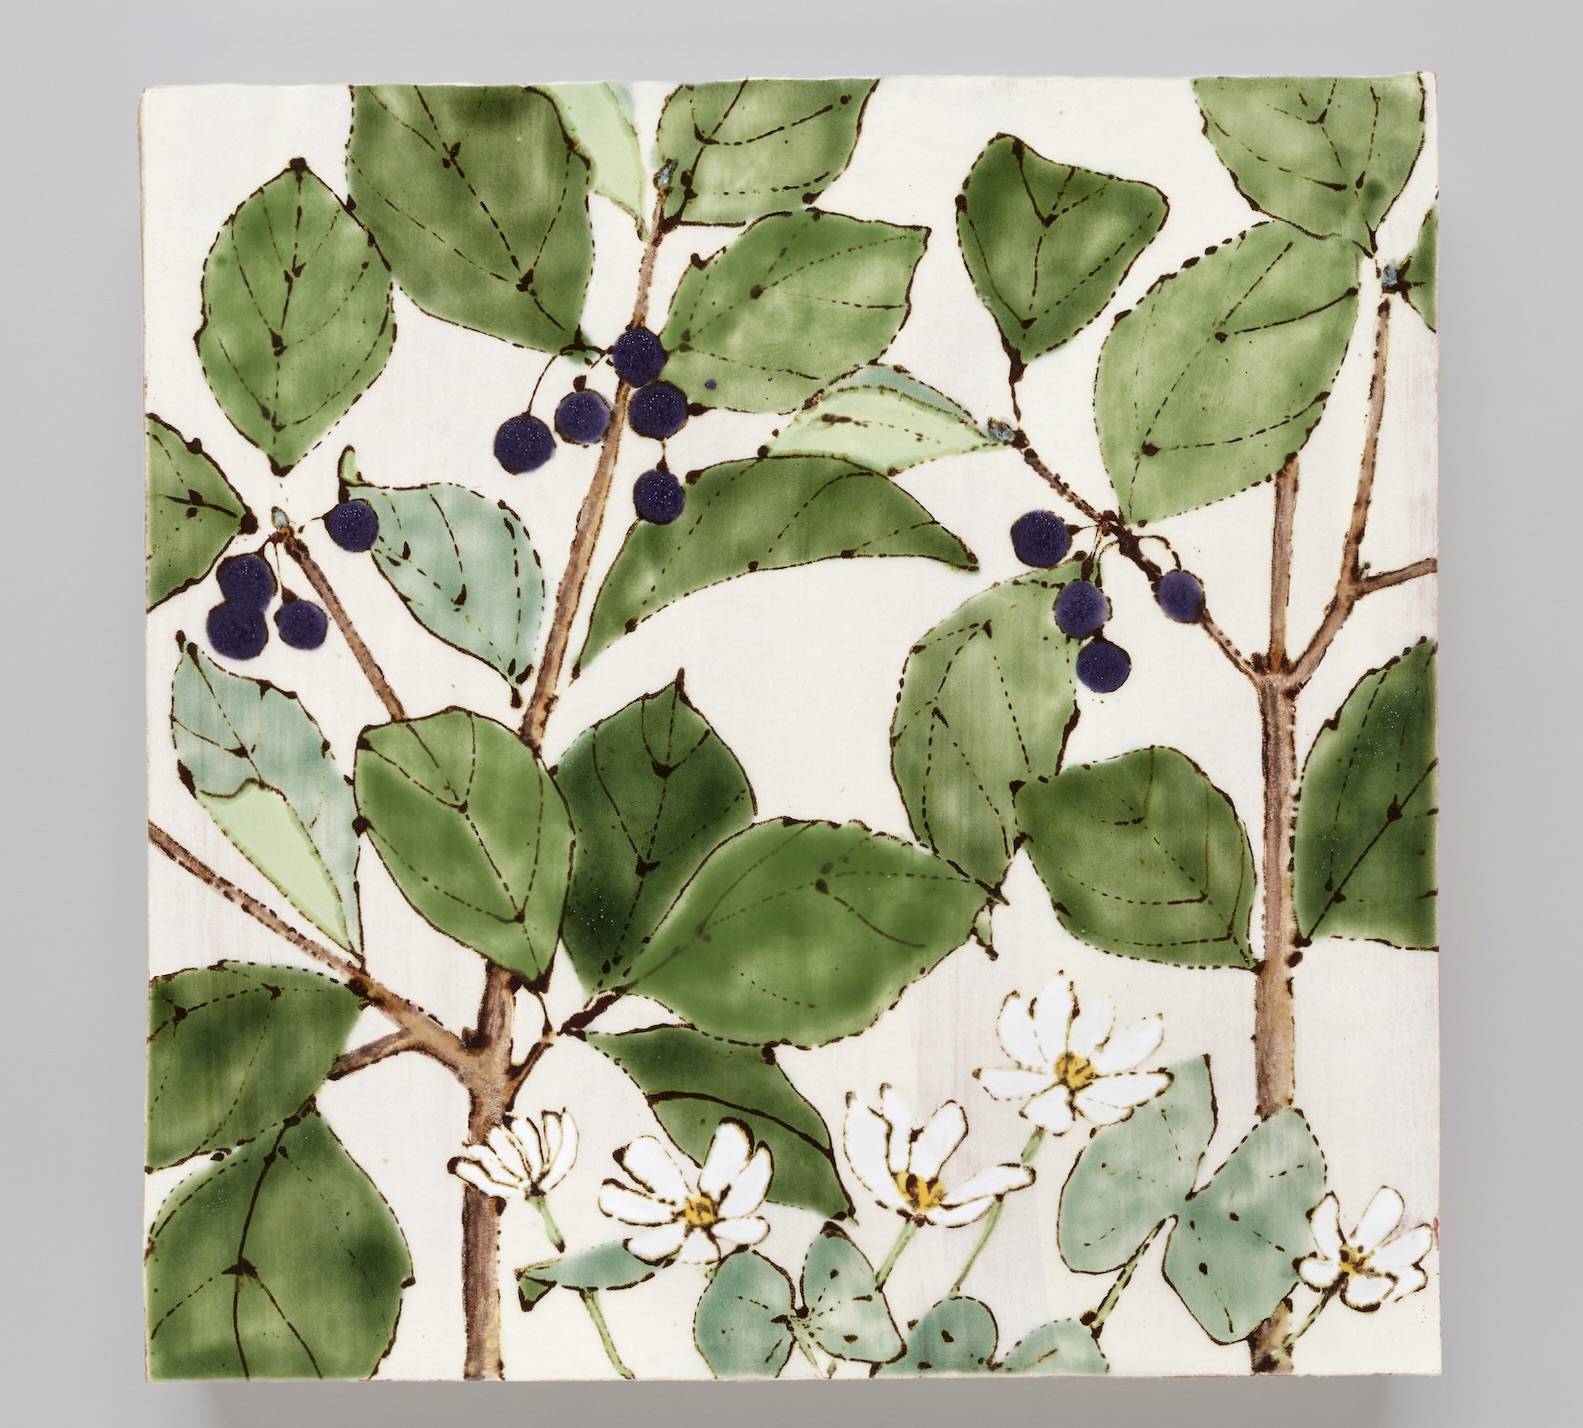 Photograph of a white ceramic tile painted with green buckthorn leaves and dark fruits.